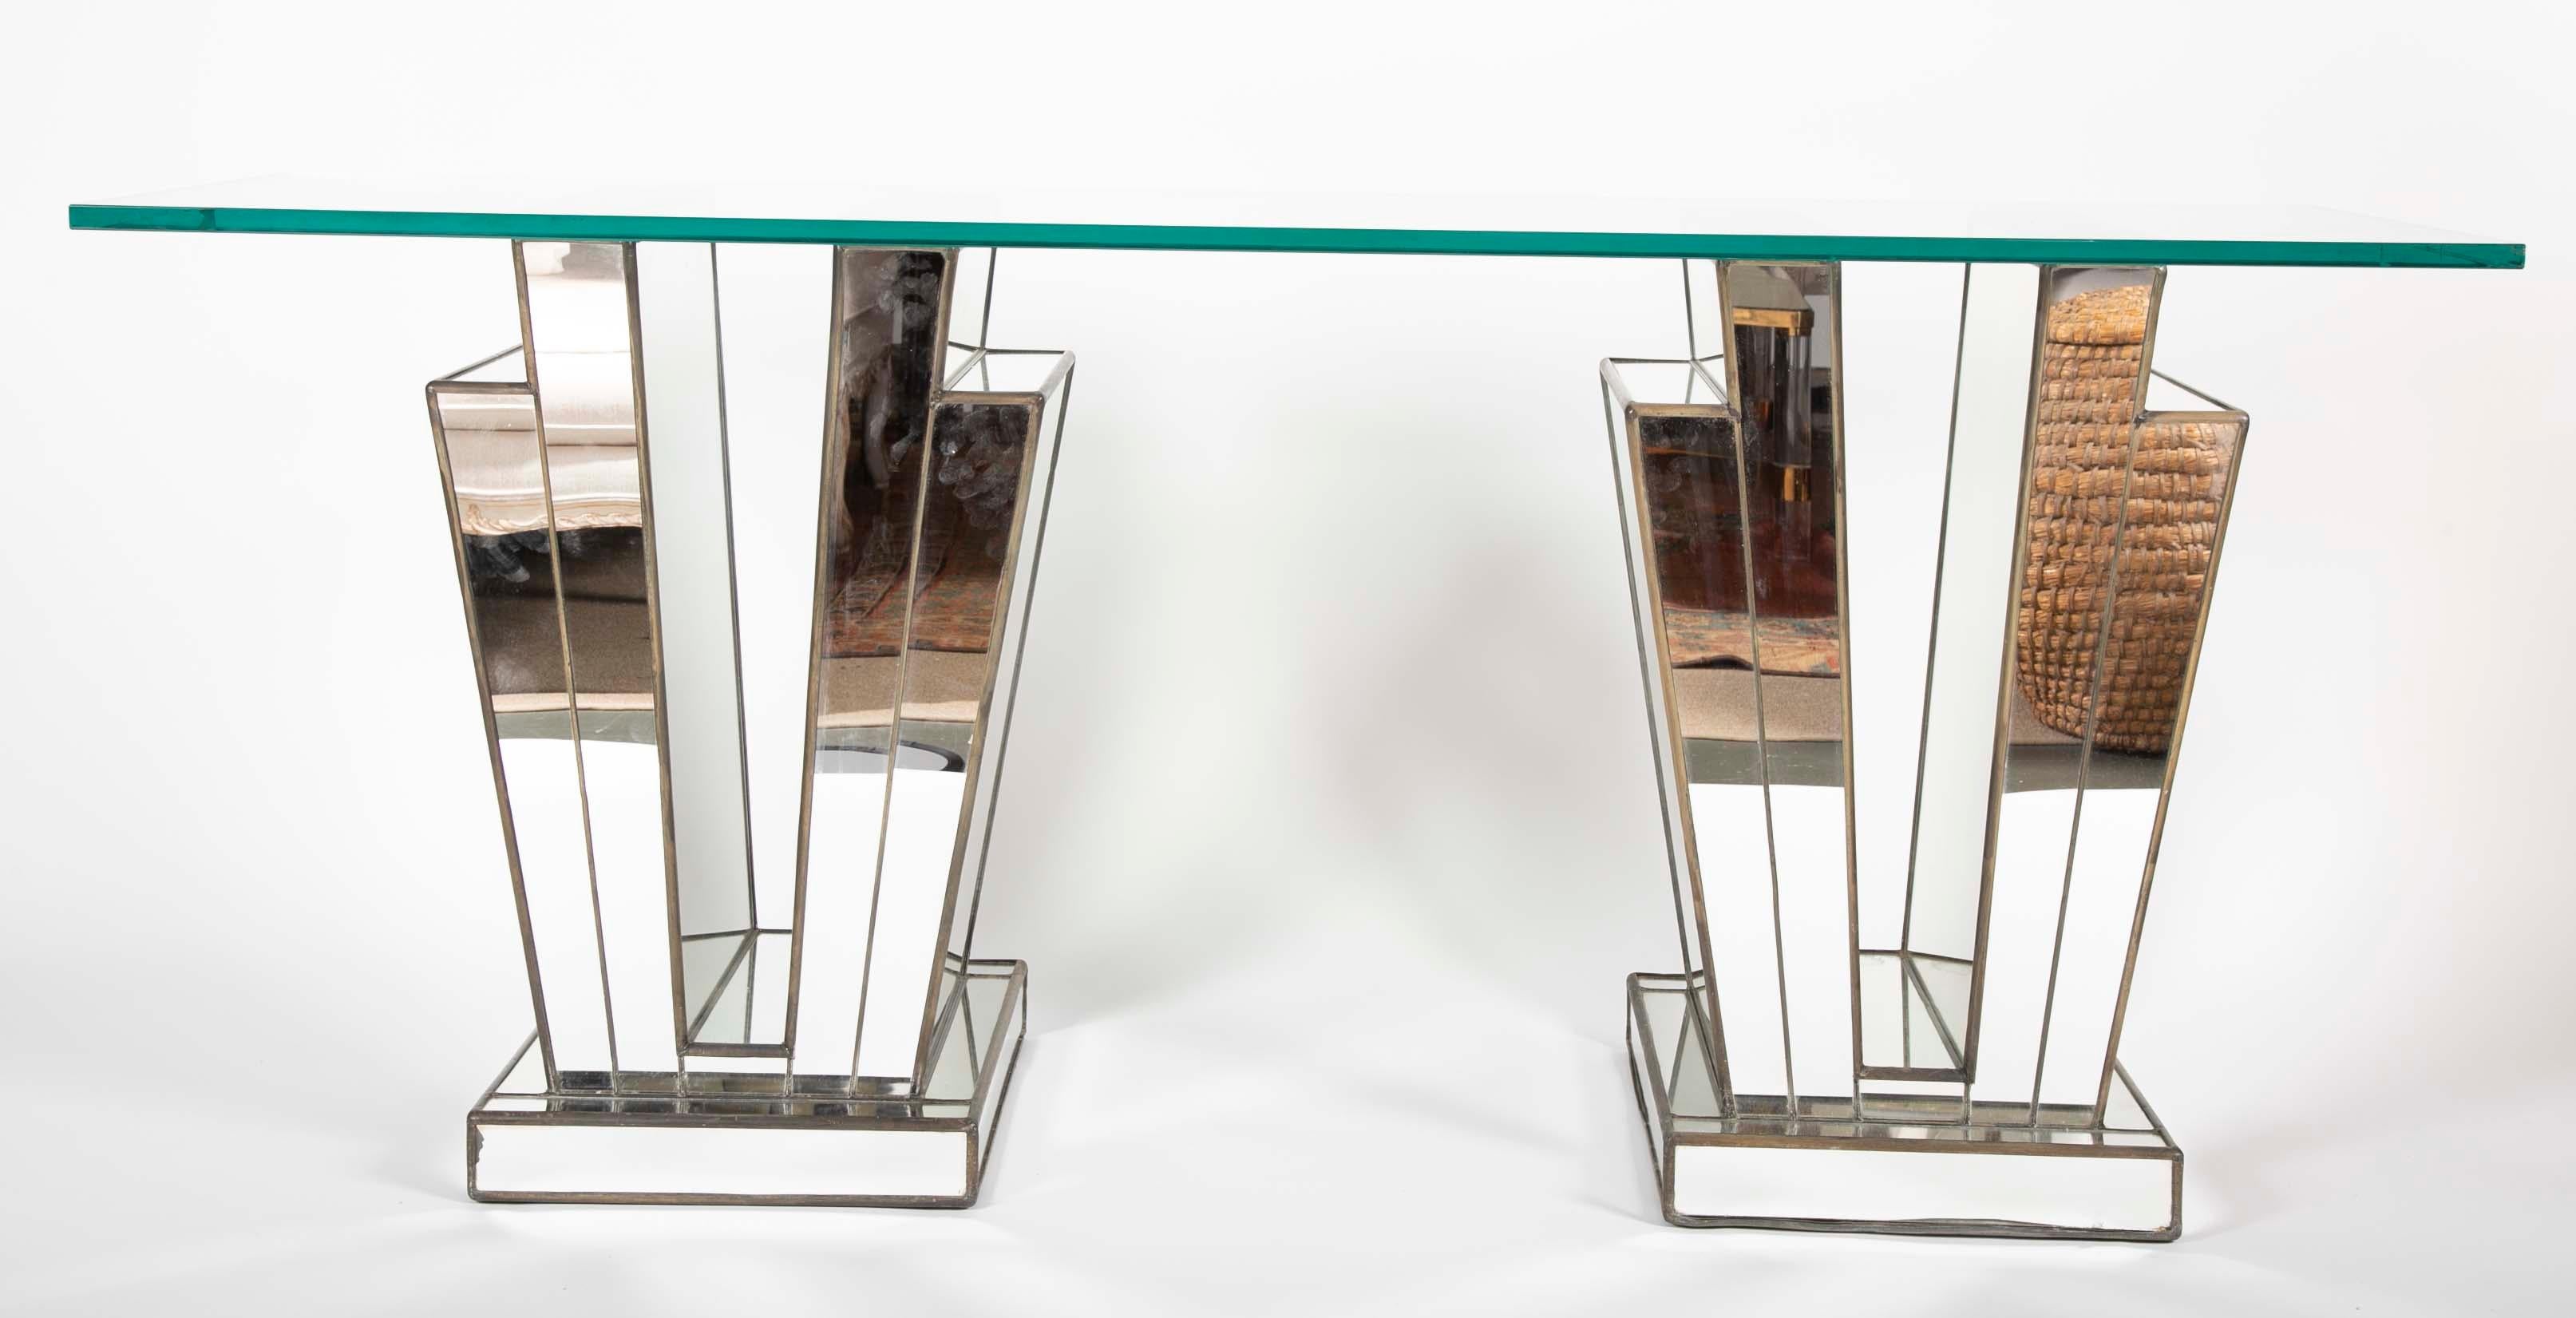 An interesting French mirrored glass Art Deco console table with glass top and lead trim.